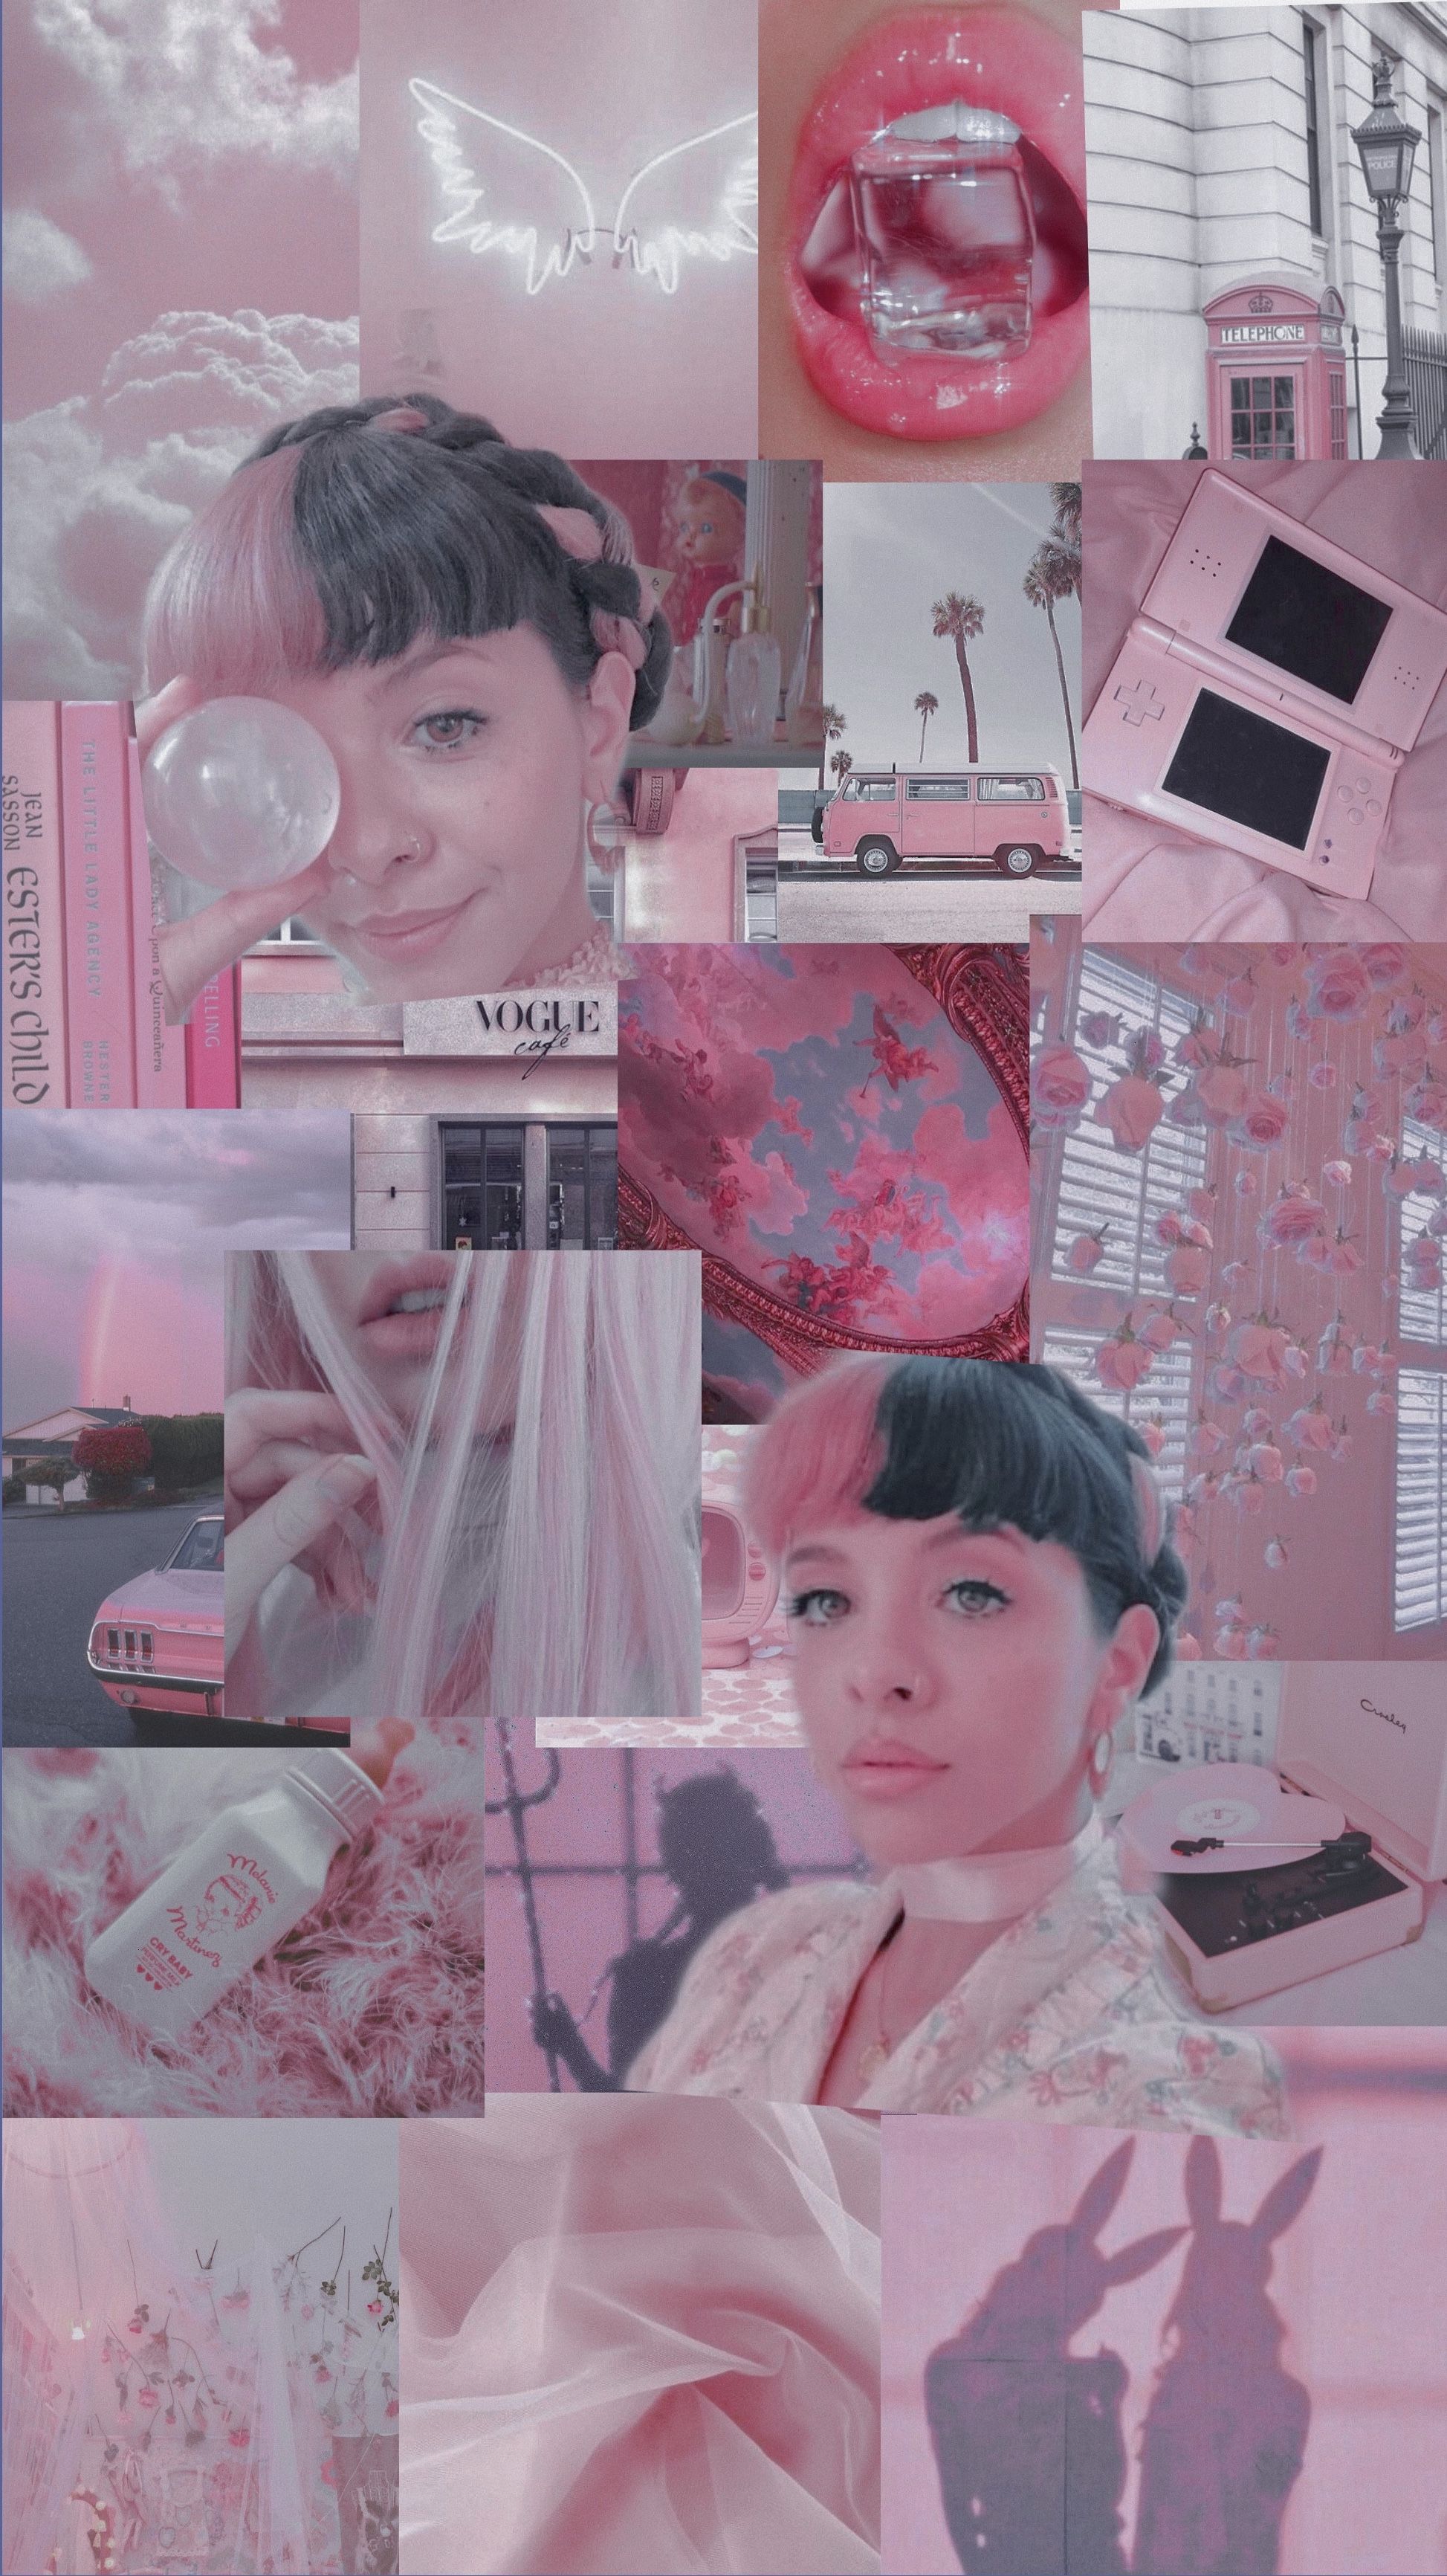 Aesthetic collage of a girl with pink hair, pink aesthetic, pink wallpaper, pink aesthetic background, pink aesthetic wallpaper, pink collage, pink aesthetic pictures, pink aesthetic background, pink aesthetic collage - Melanie Martinez